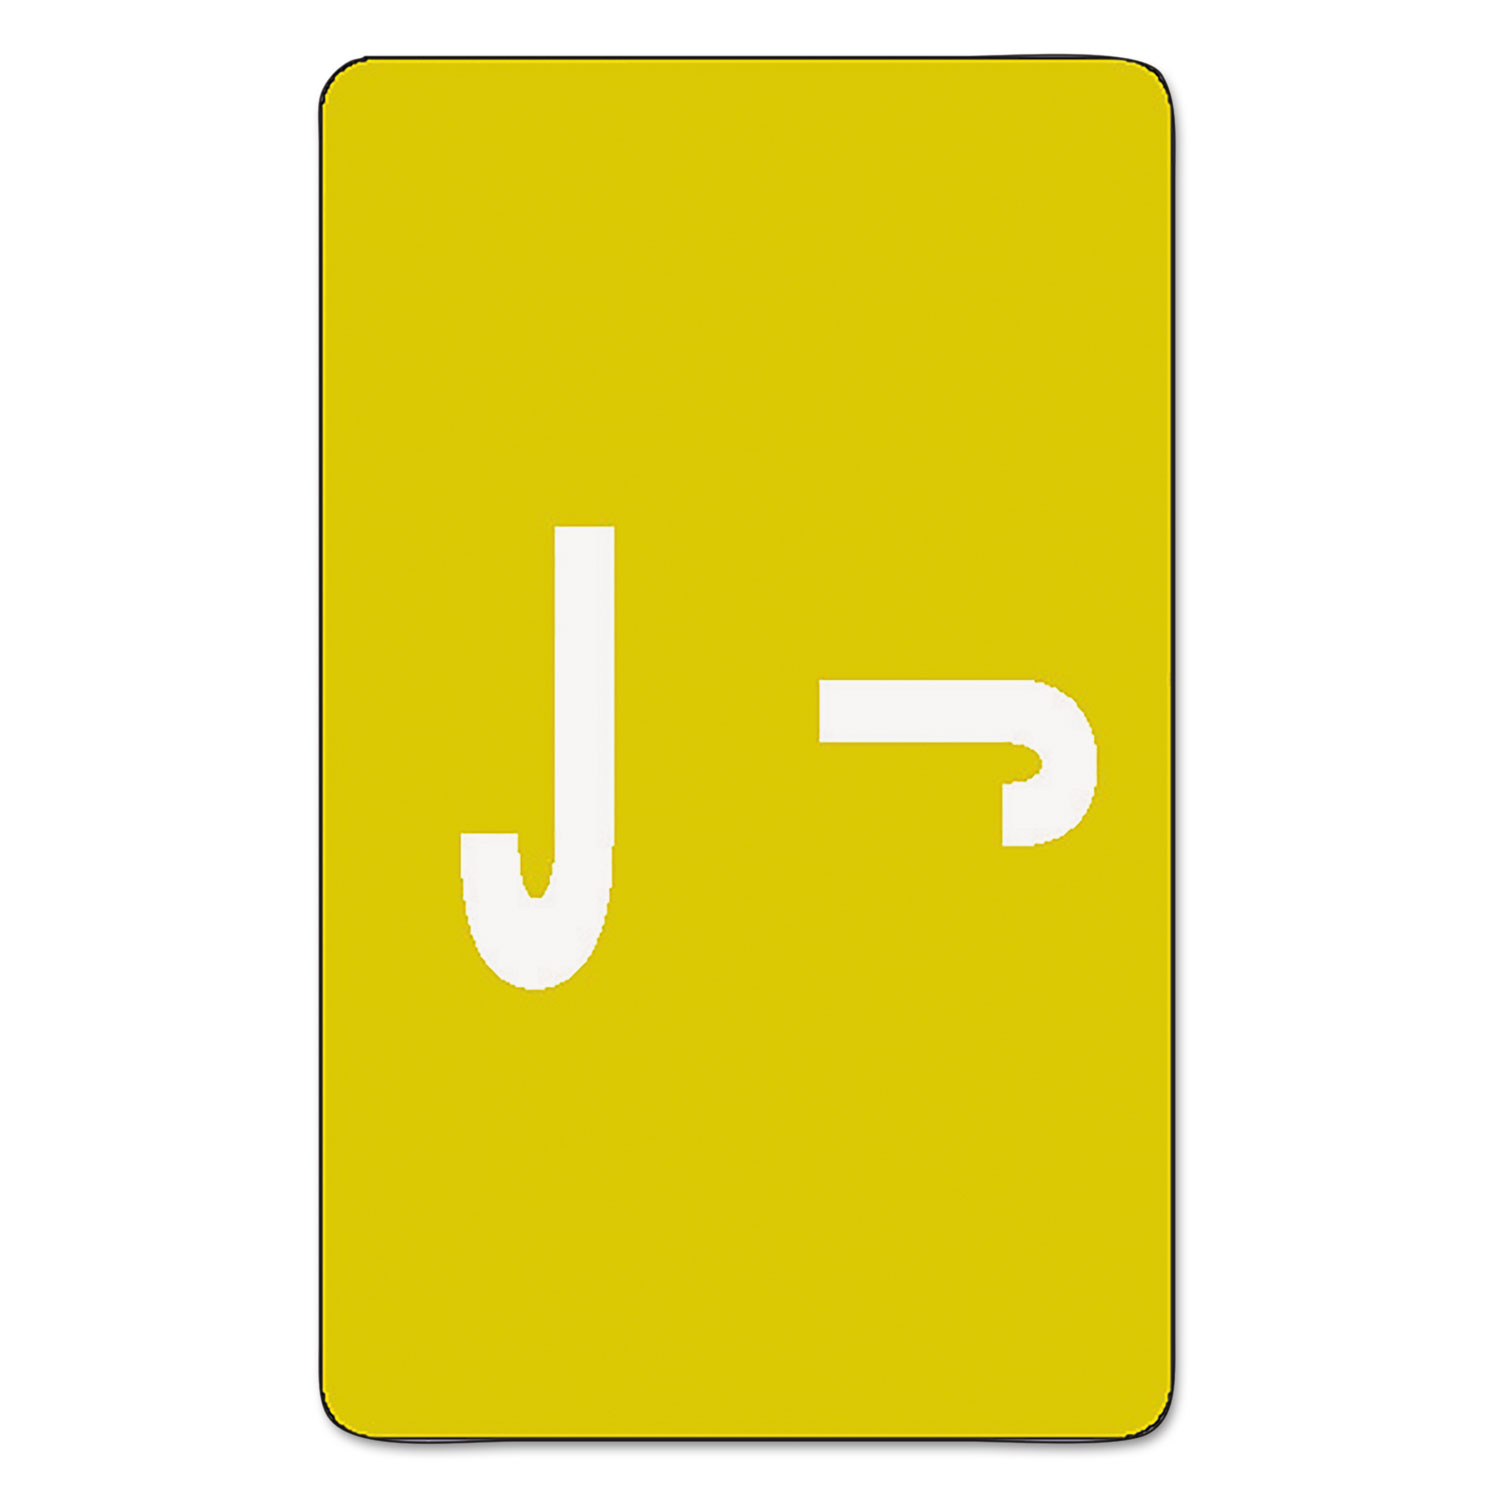  Smead 67180 AlphaZ Color-Coded Second Letter Alphabetical Labels, J, 1 x 1.63, Yellow, 10/Sheet, 10 Sheets/Pack (SMD67180) 